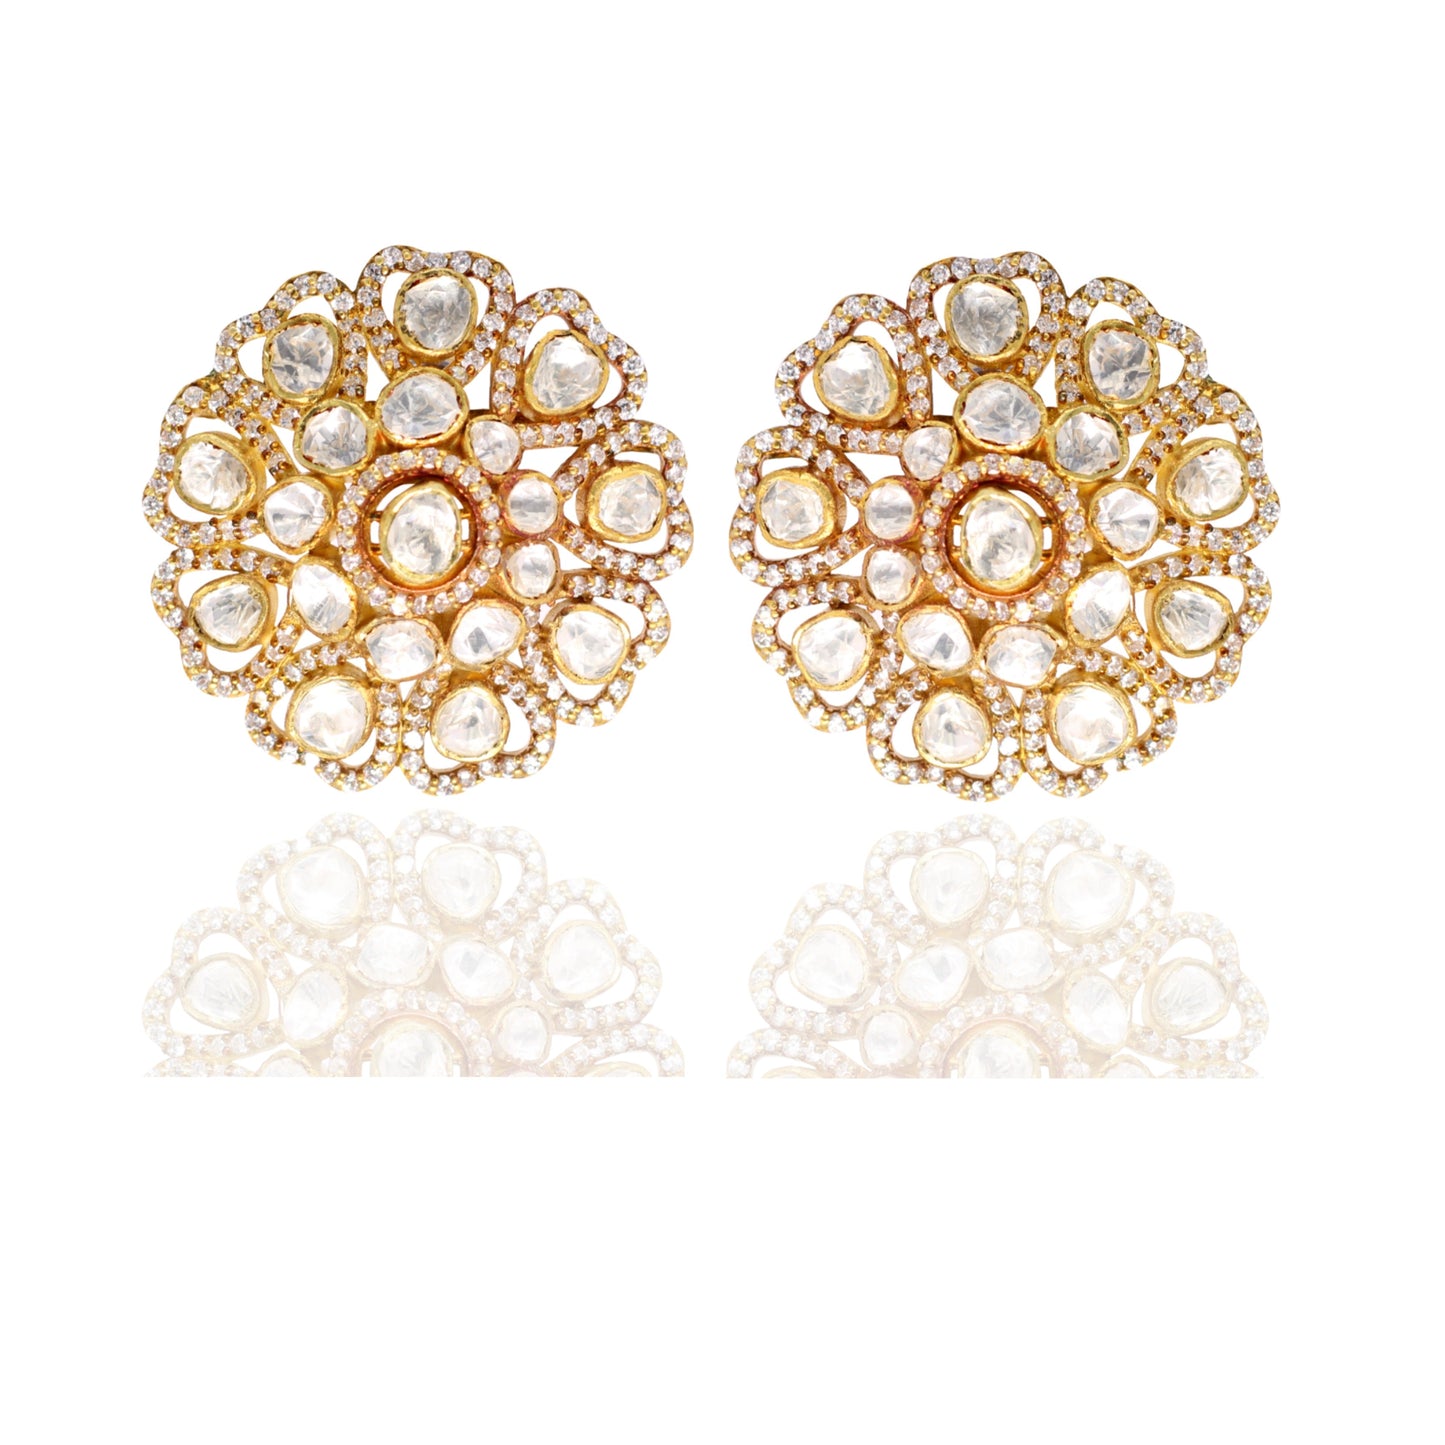 White Stoned Gold Ethnic Party Wear Earrings - Precious-lady